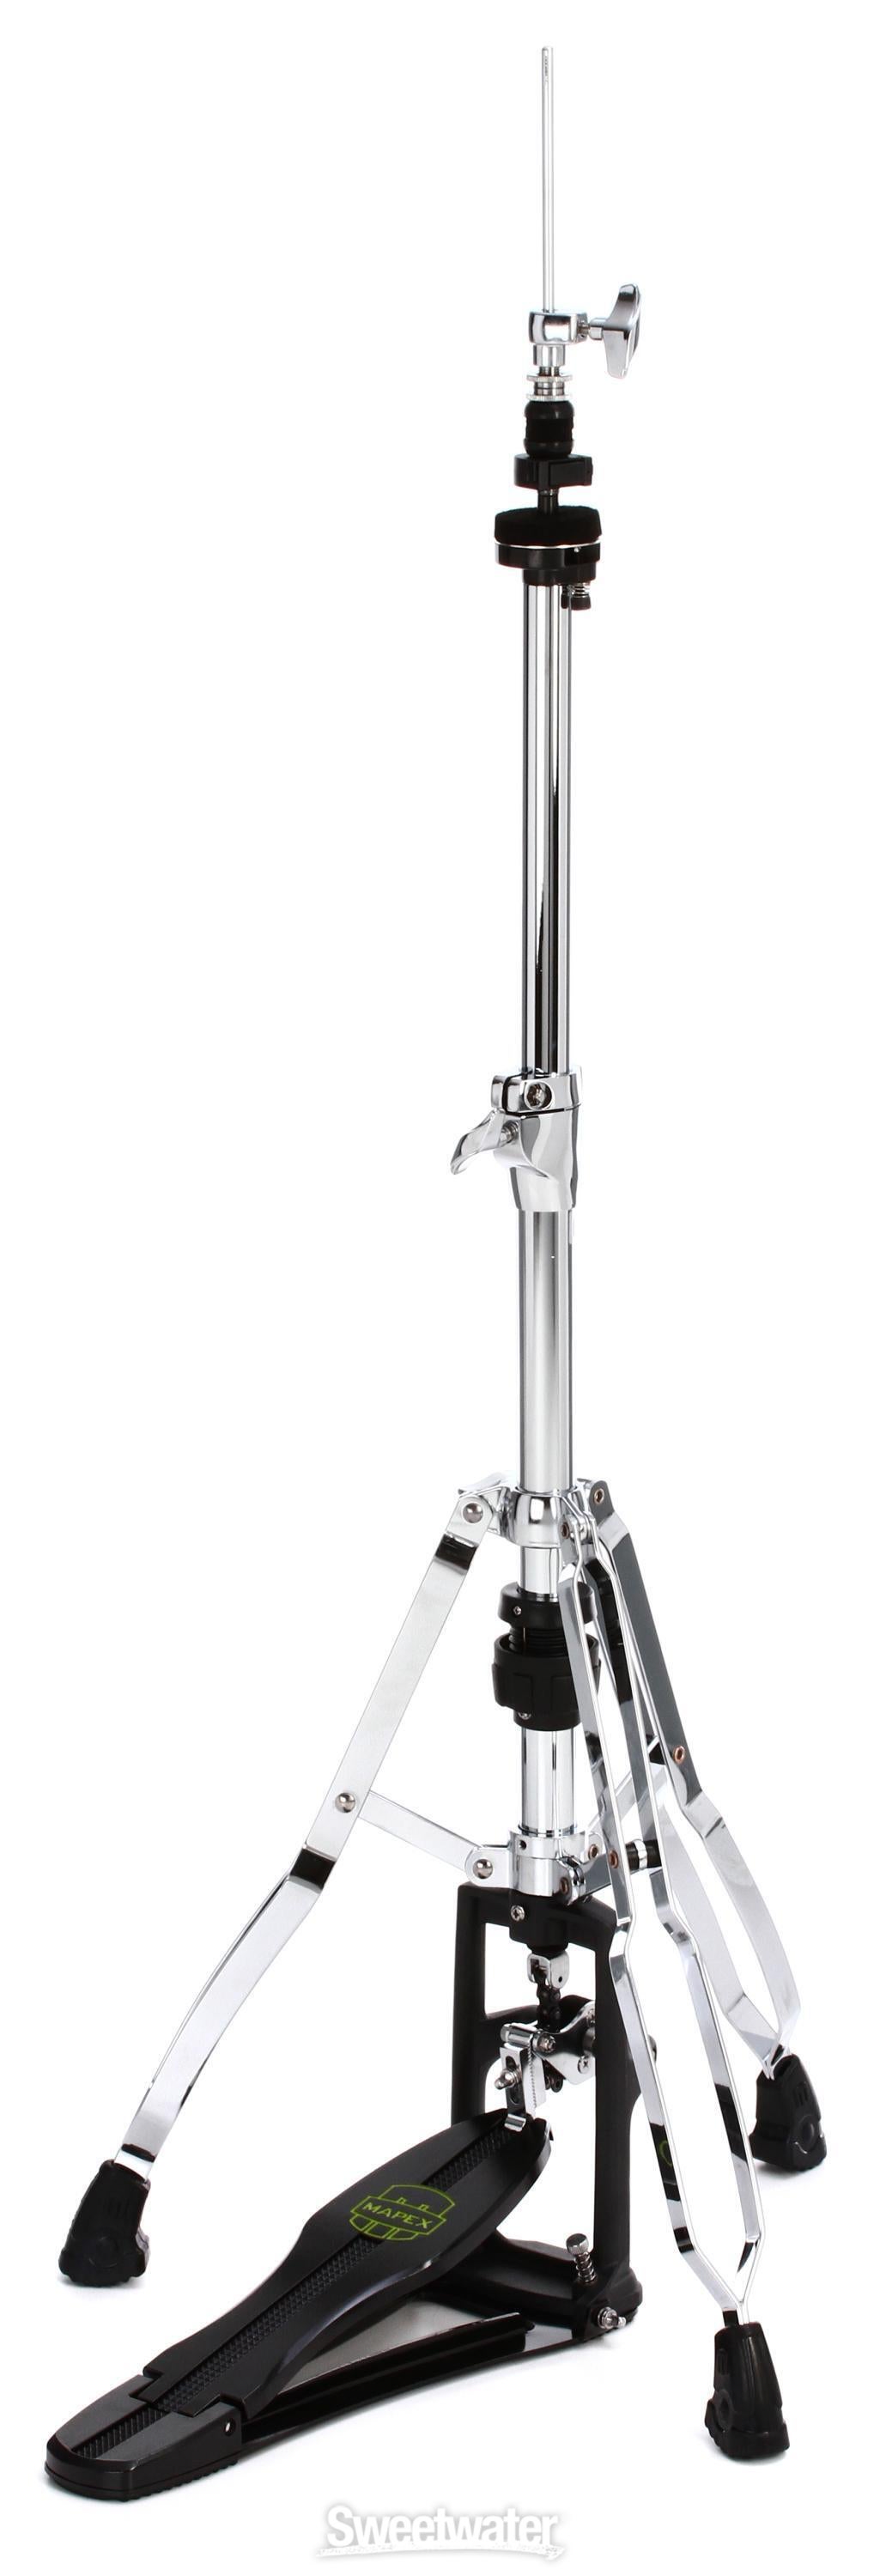 Mapex H800 Armory Series Double Braced Hi-Hat Stand - Chrome Plated - 3-leg